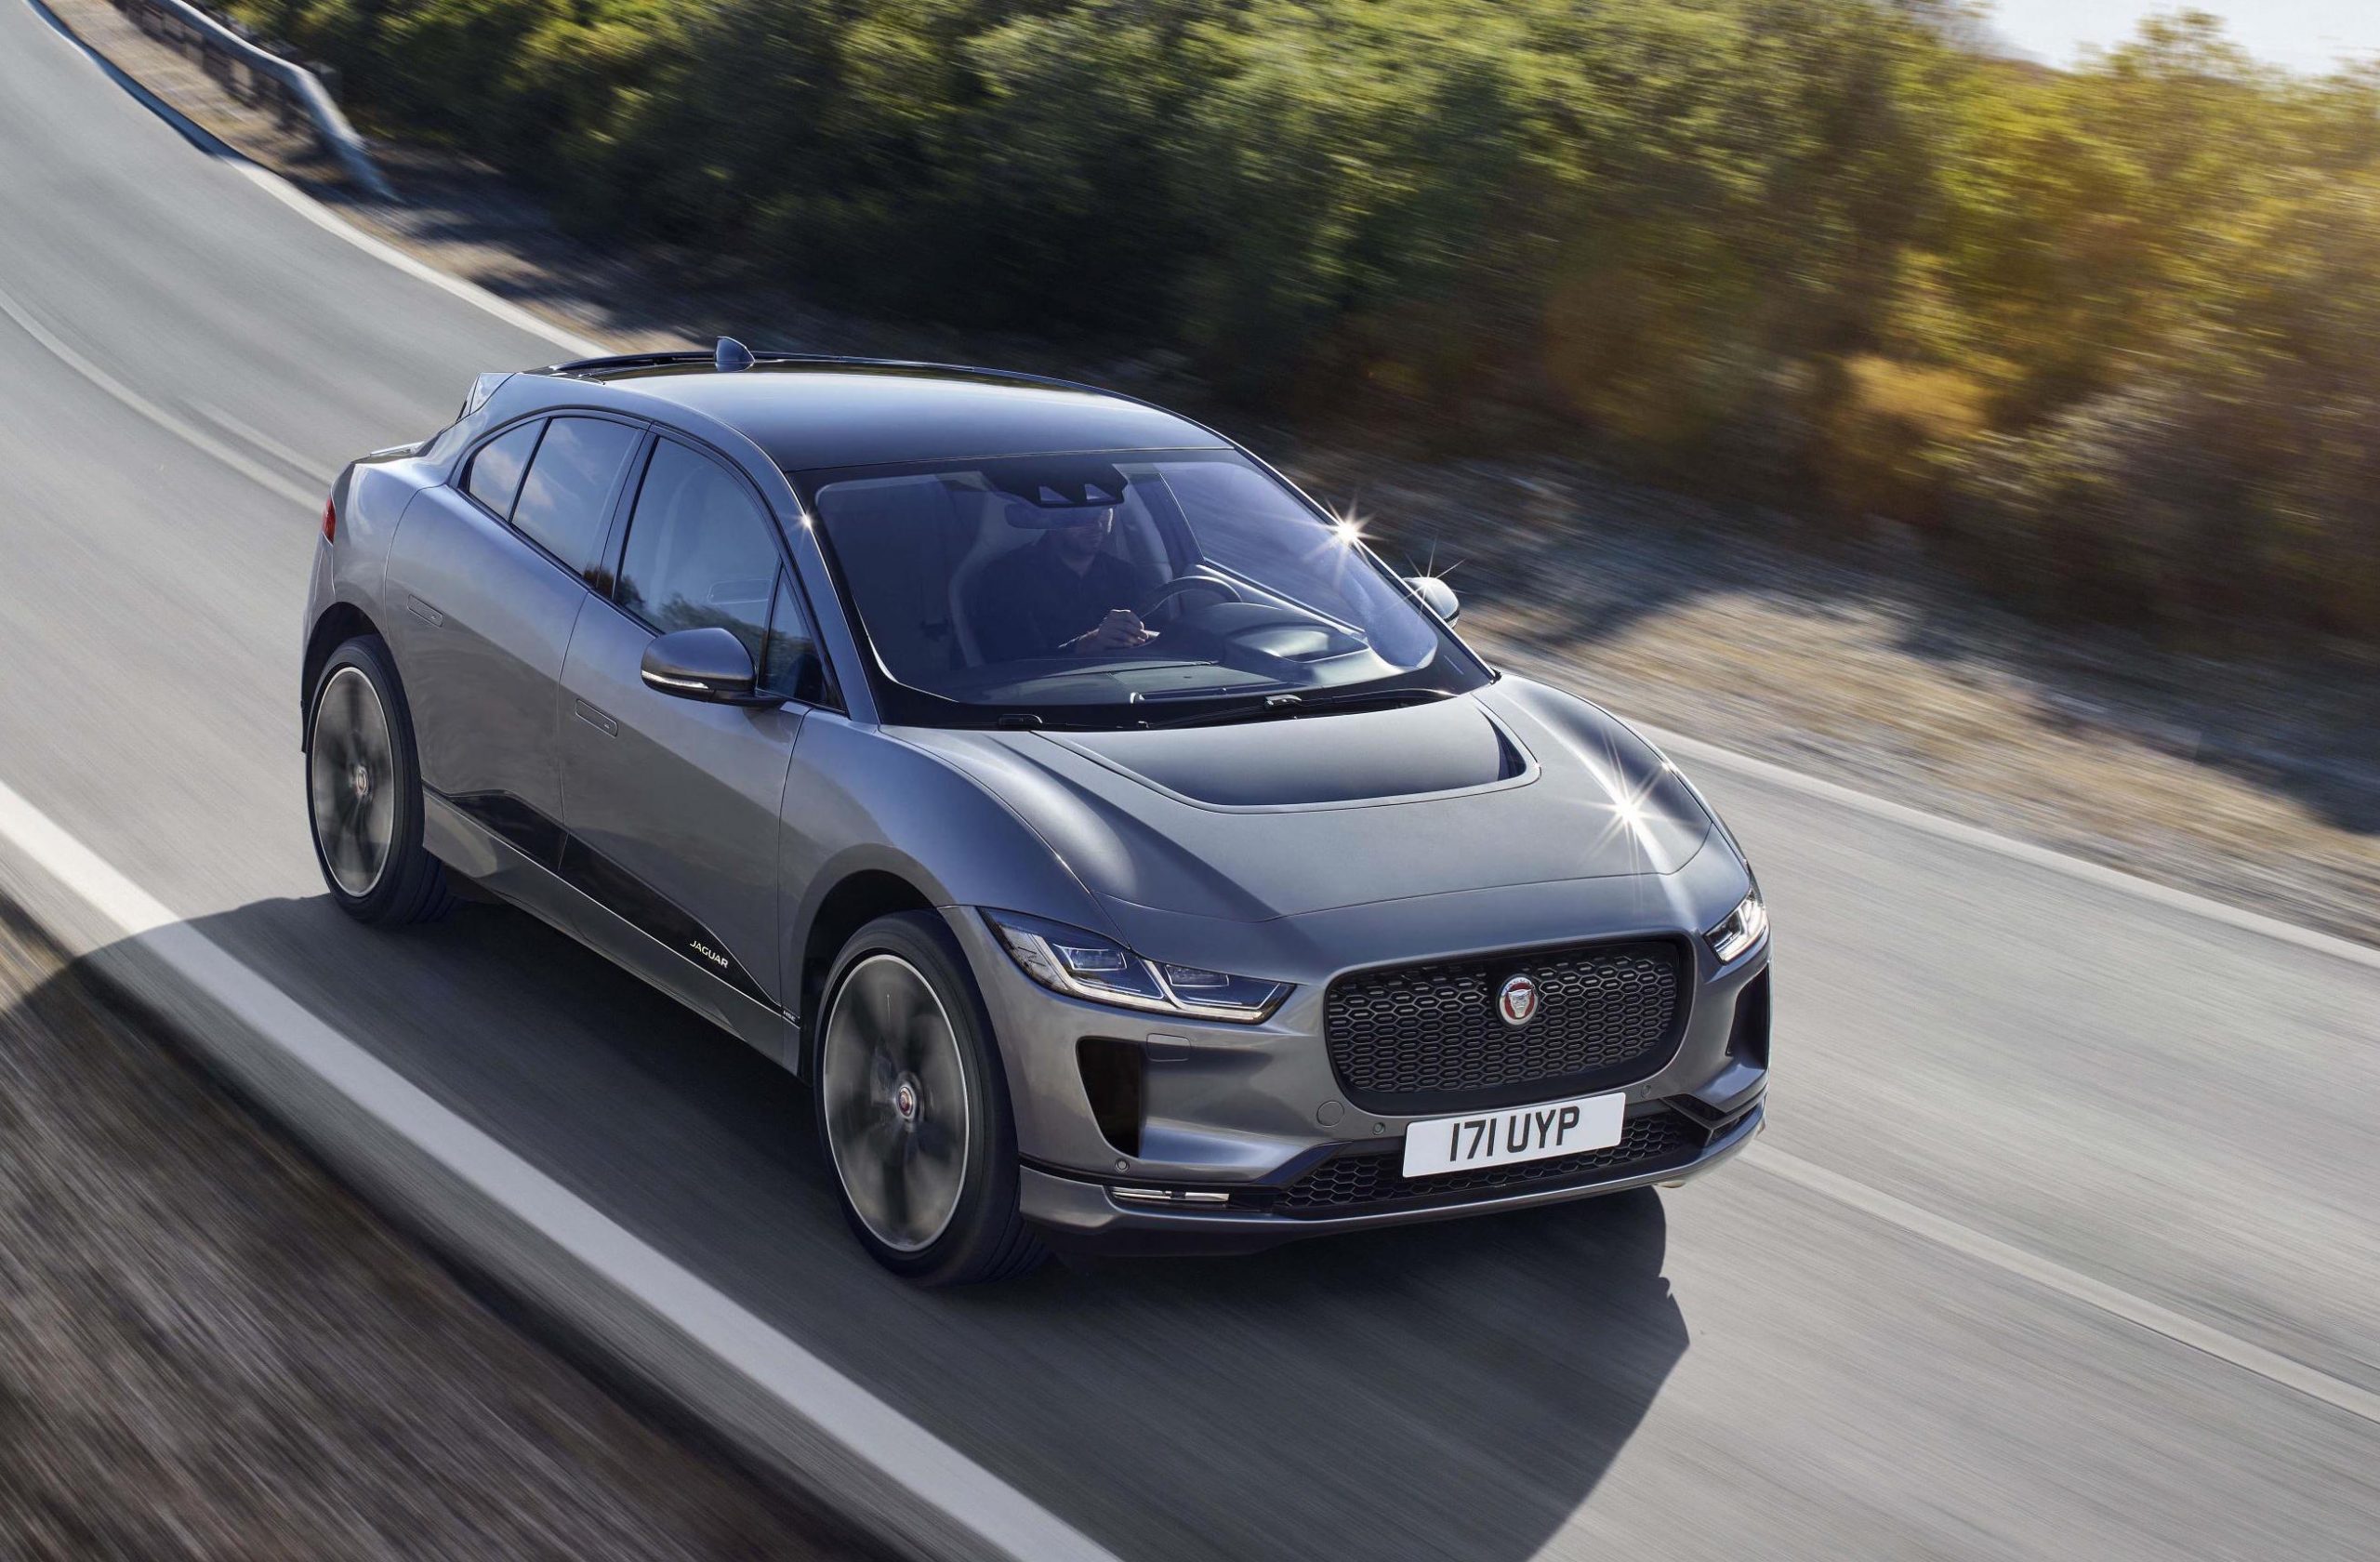 2019 World Car of the Year awards announced: Jaguar I-PACE wins